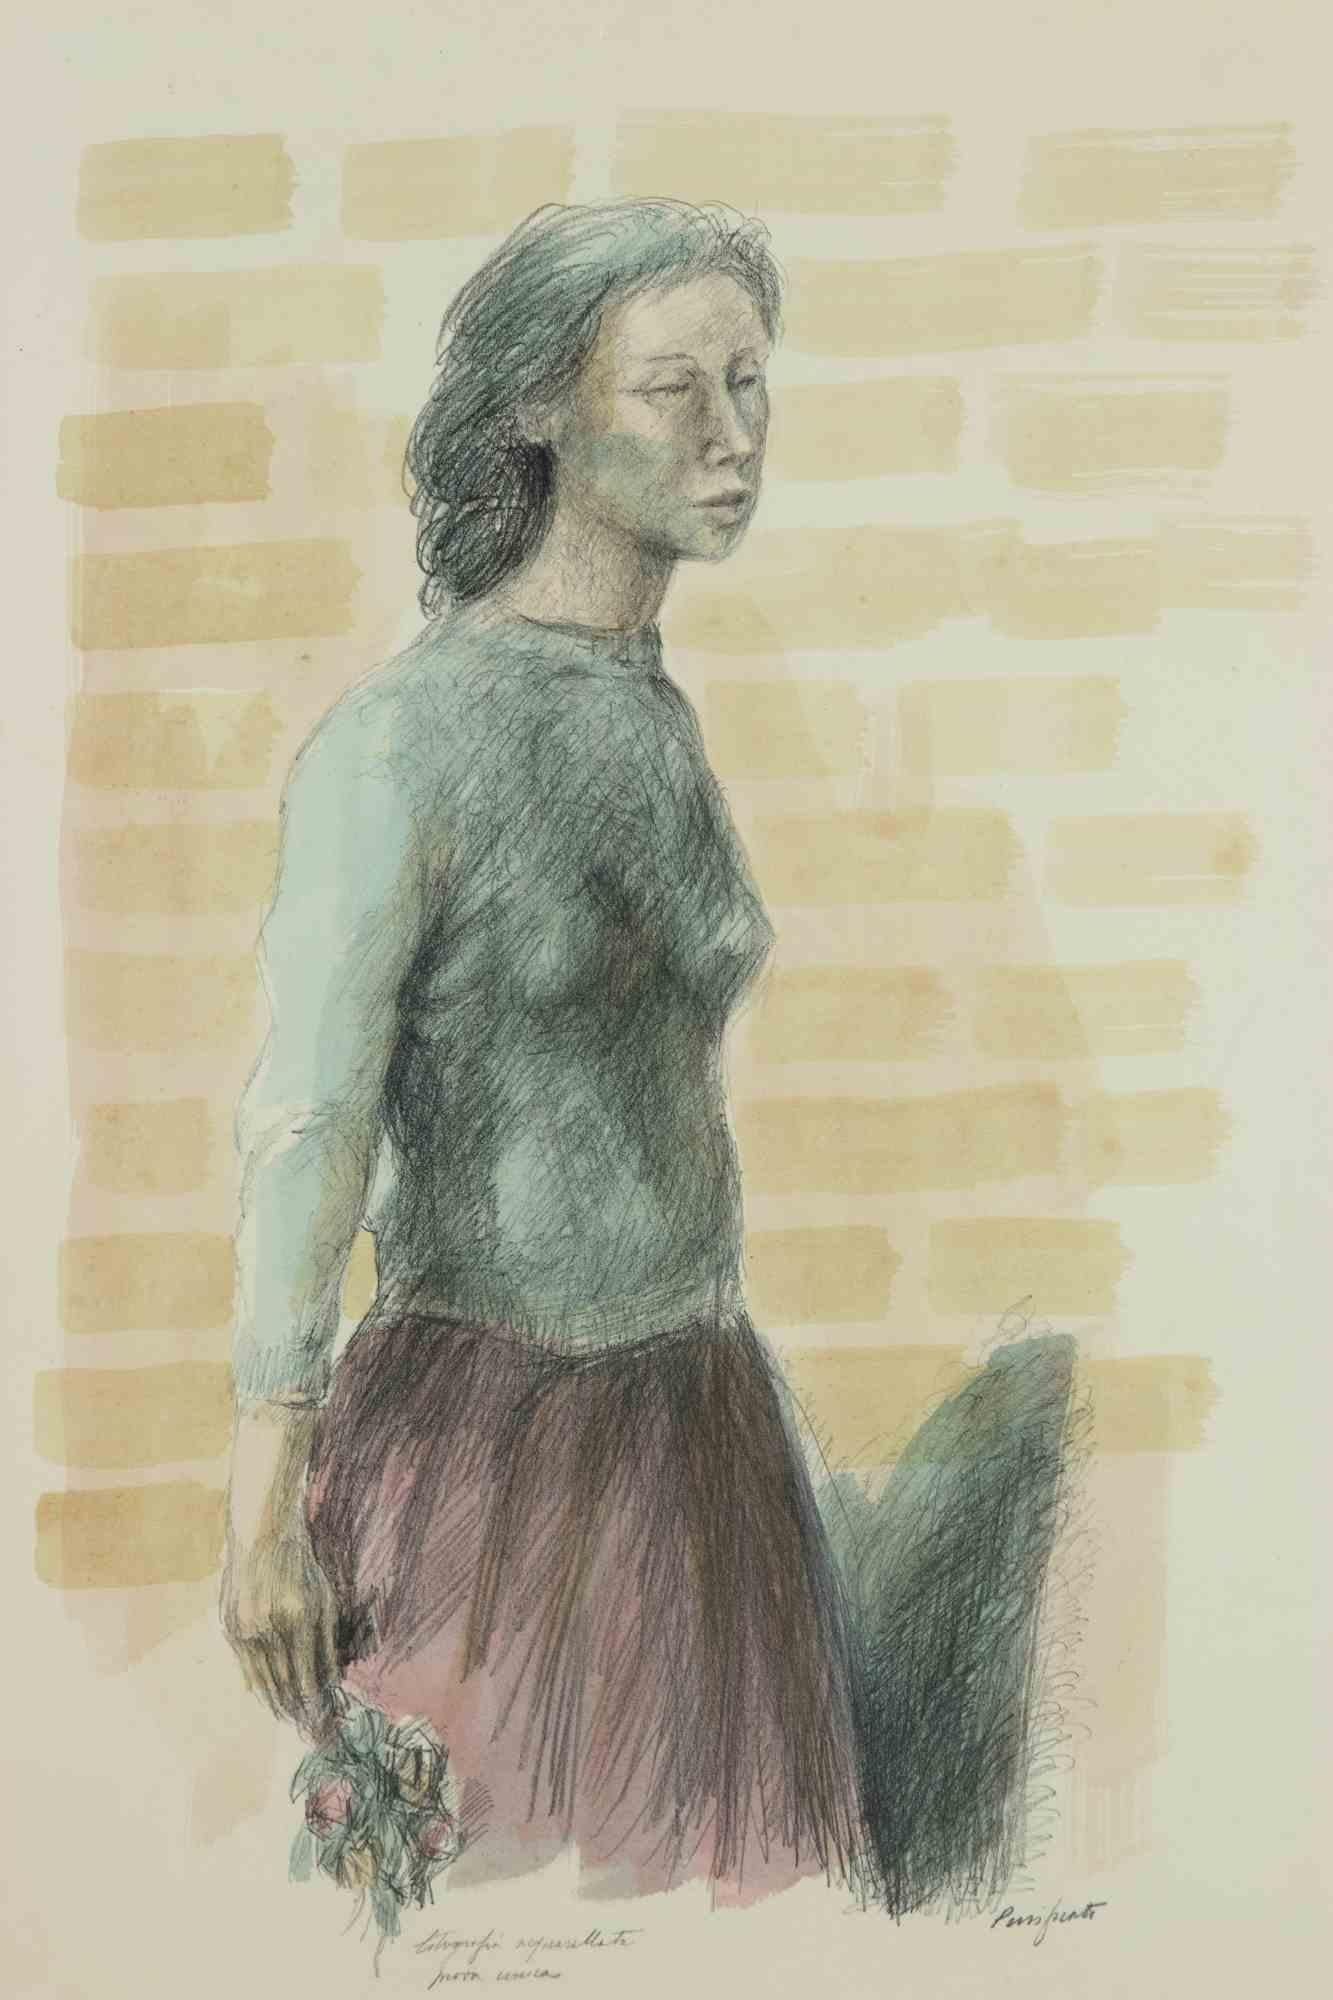 Female figure is an orginal modern artwork realizd by Domenico Purificato.

Hand watercolored monotype lithograph.

Hand signed by the artist. Unique specimen.

Includes frame: 84.5 x 63.5 cm